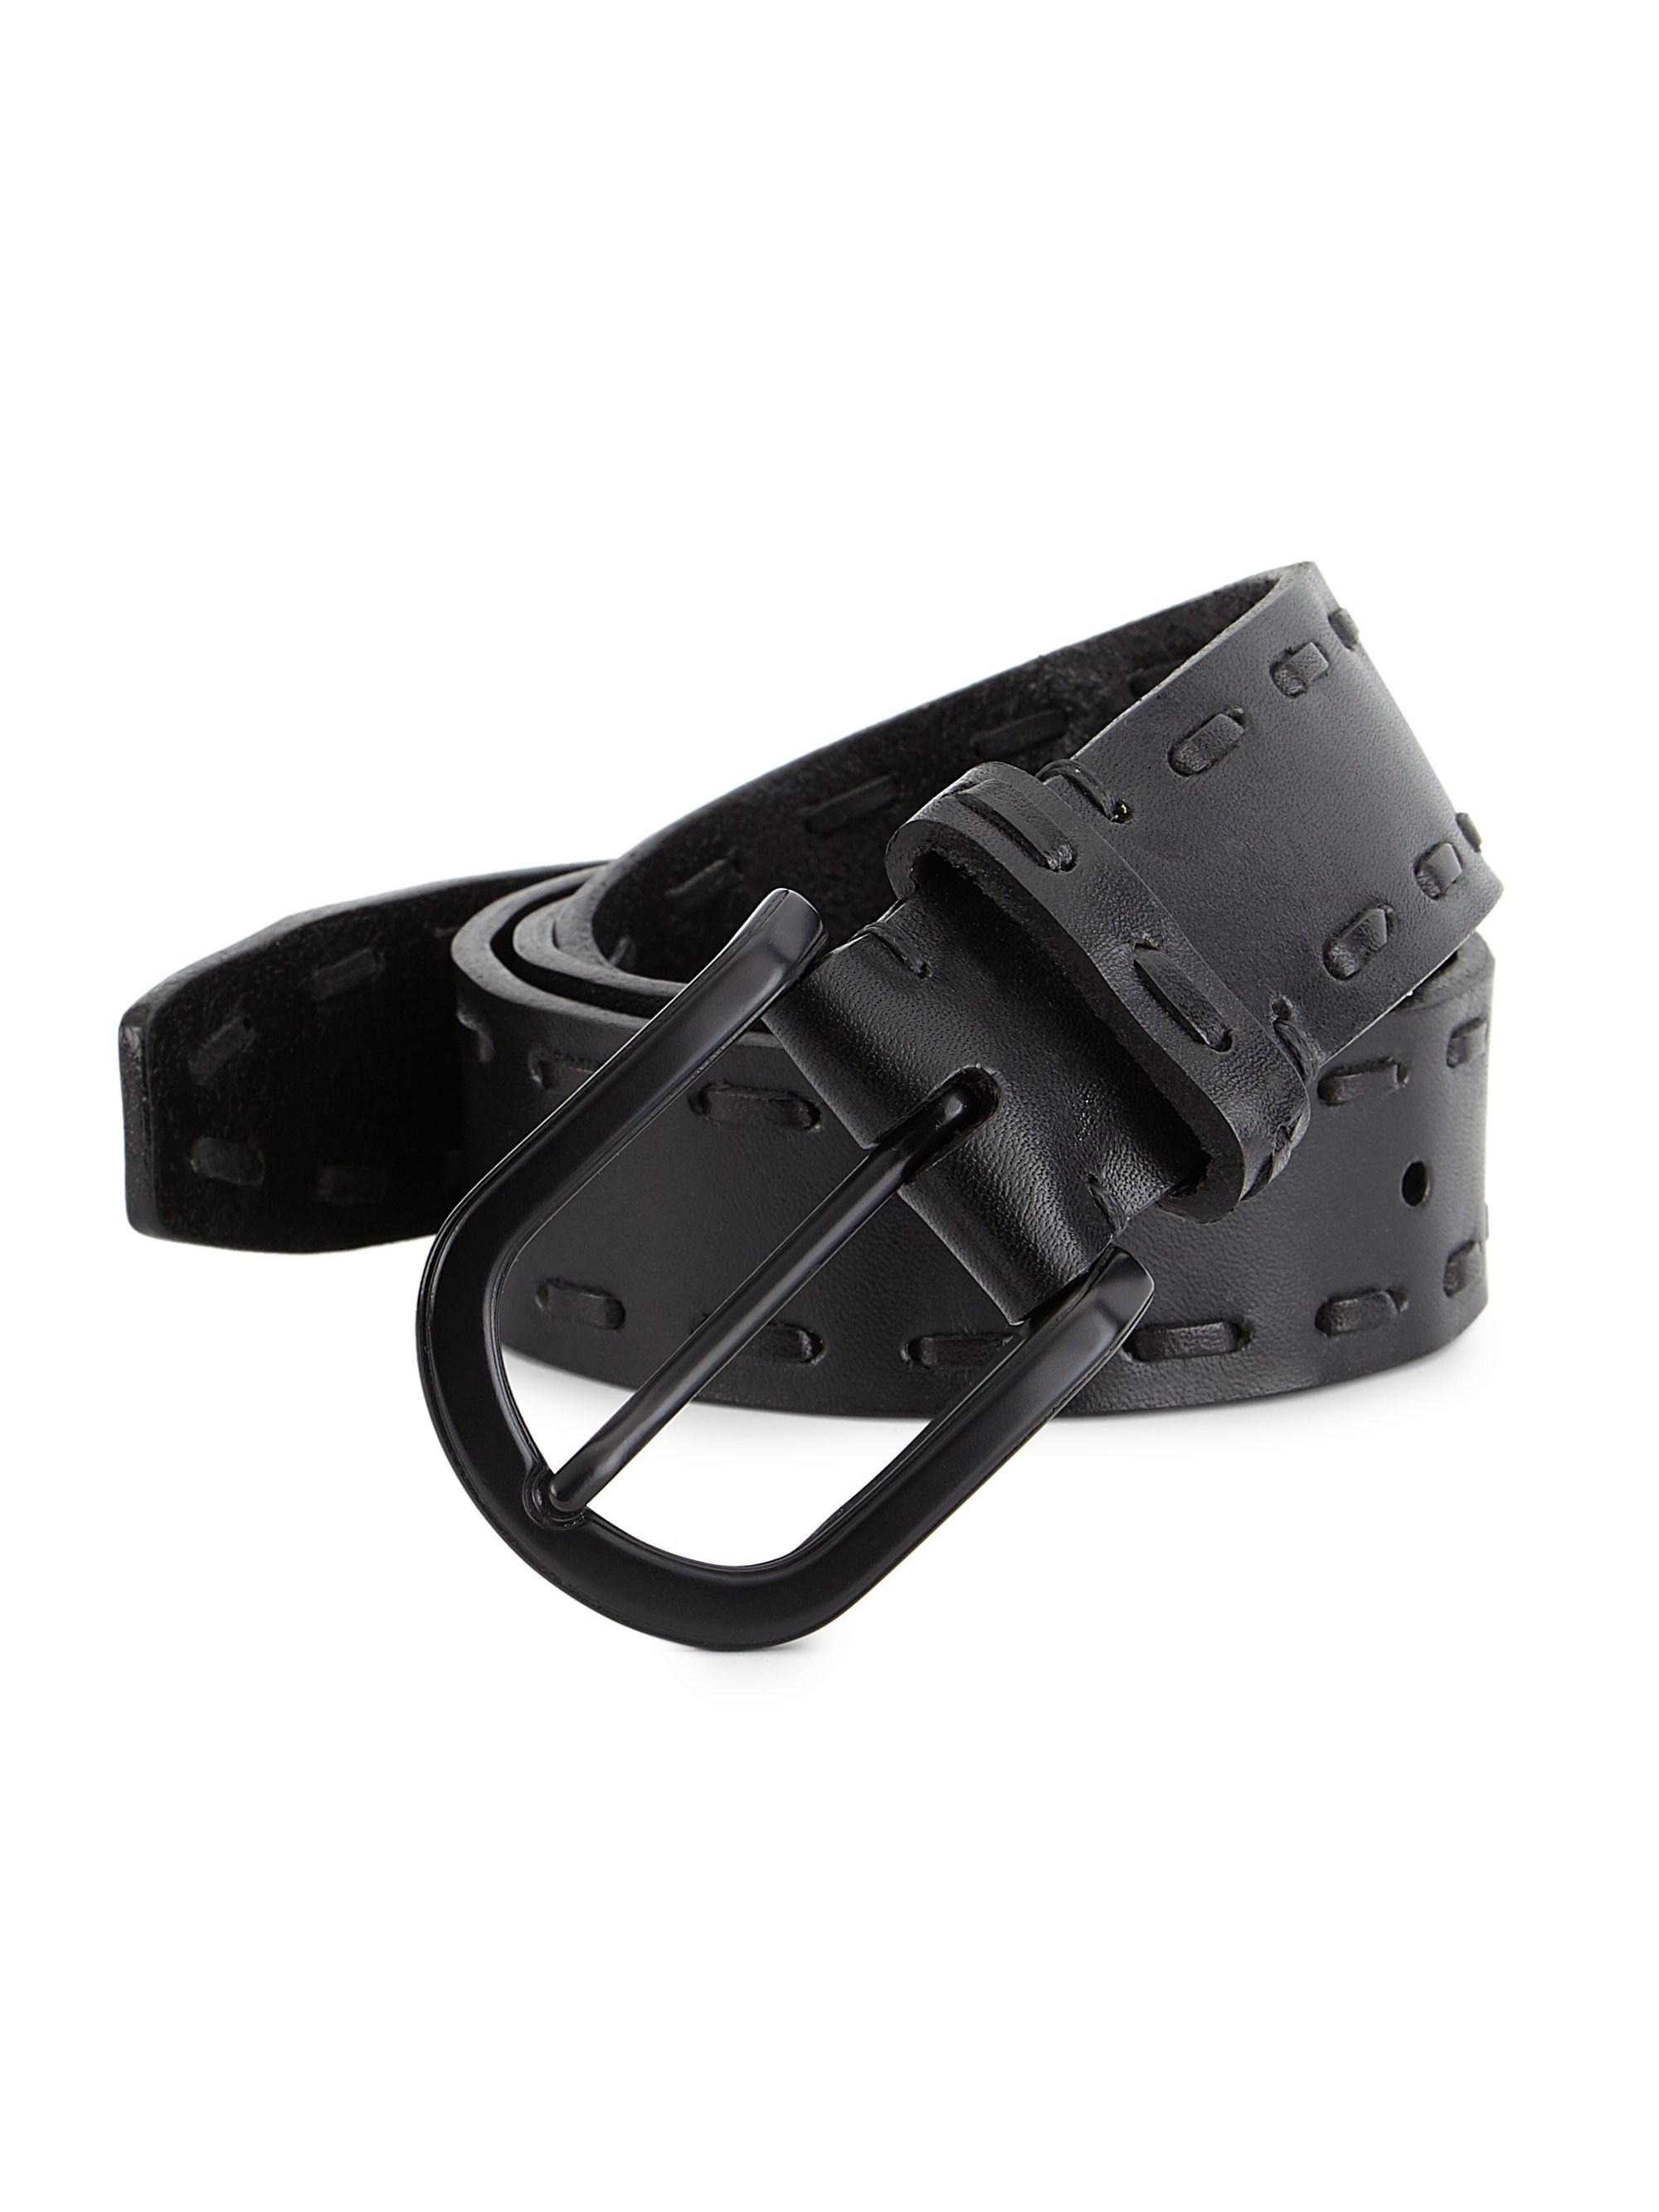 Saks Fifth Avenue Collection Stitched Edge Leather Belt in Black for Men - Lyst